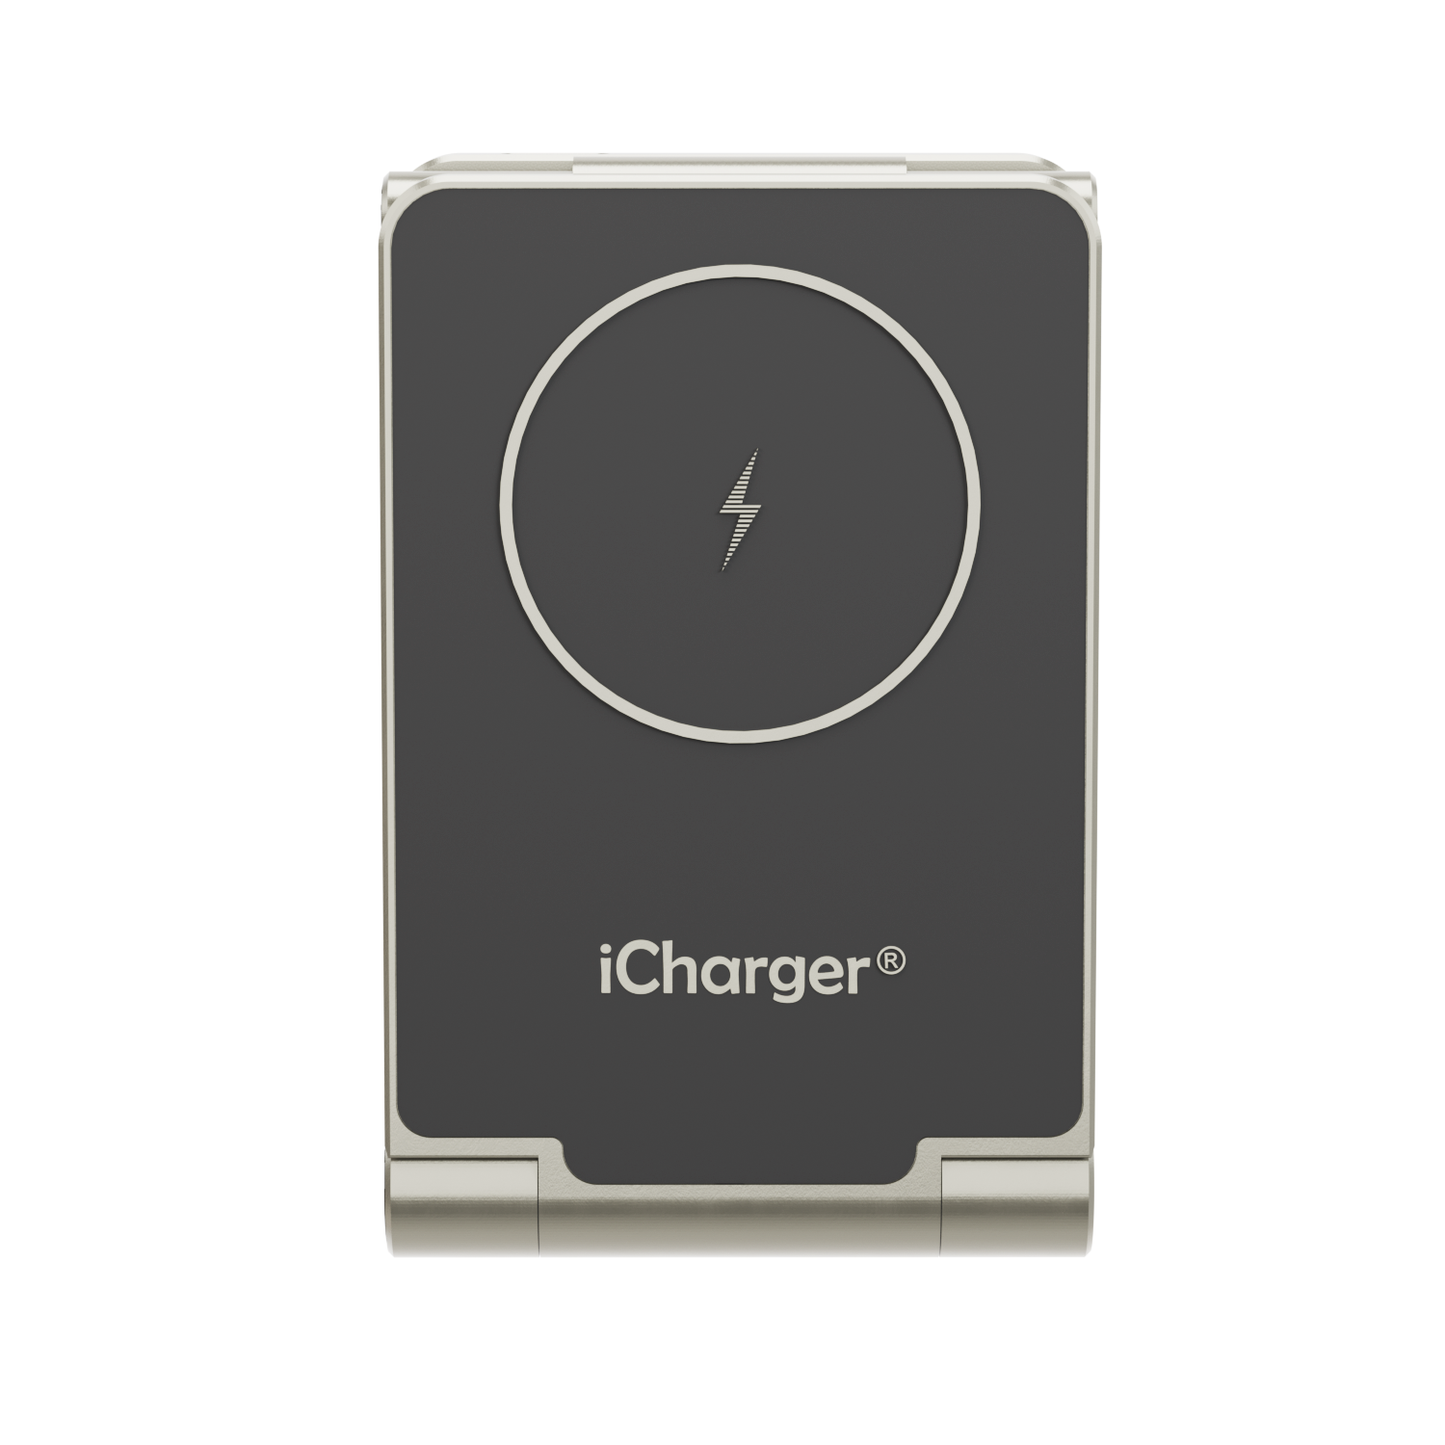 iCharger MagSafe Hybrid Pro in folded, portable design showcasing the MagSafe charging circle and iCharger branding, ideal for travel with Apple and Samsung device compatibility.